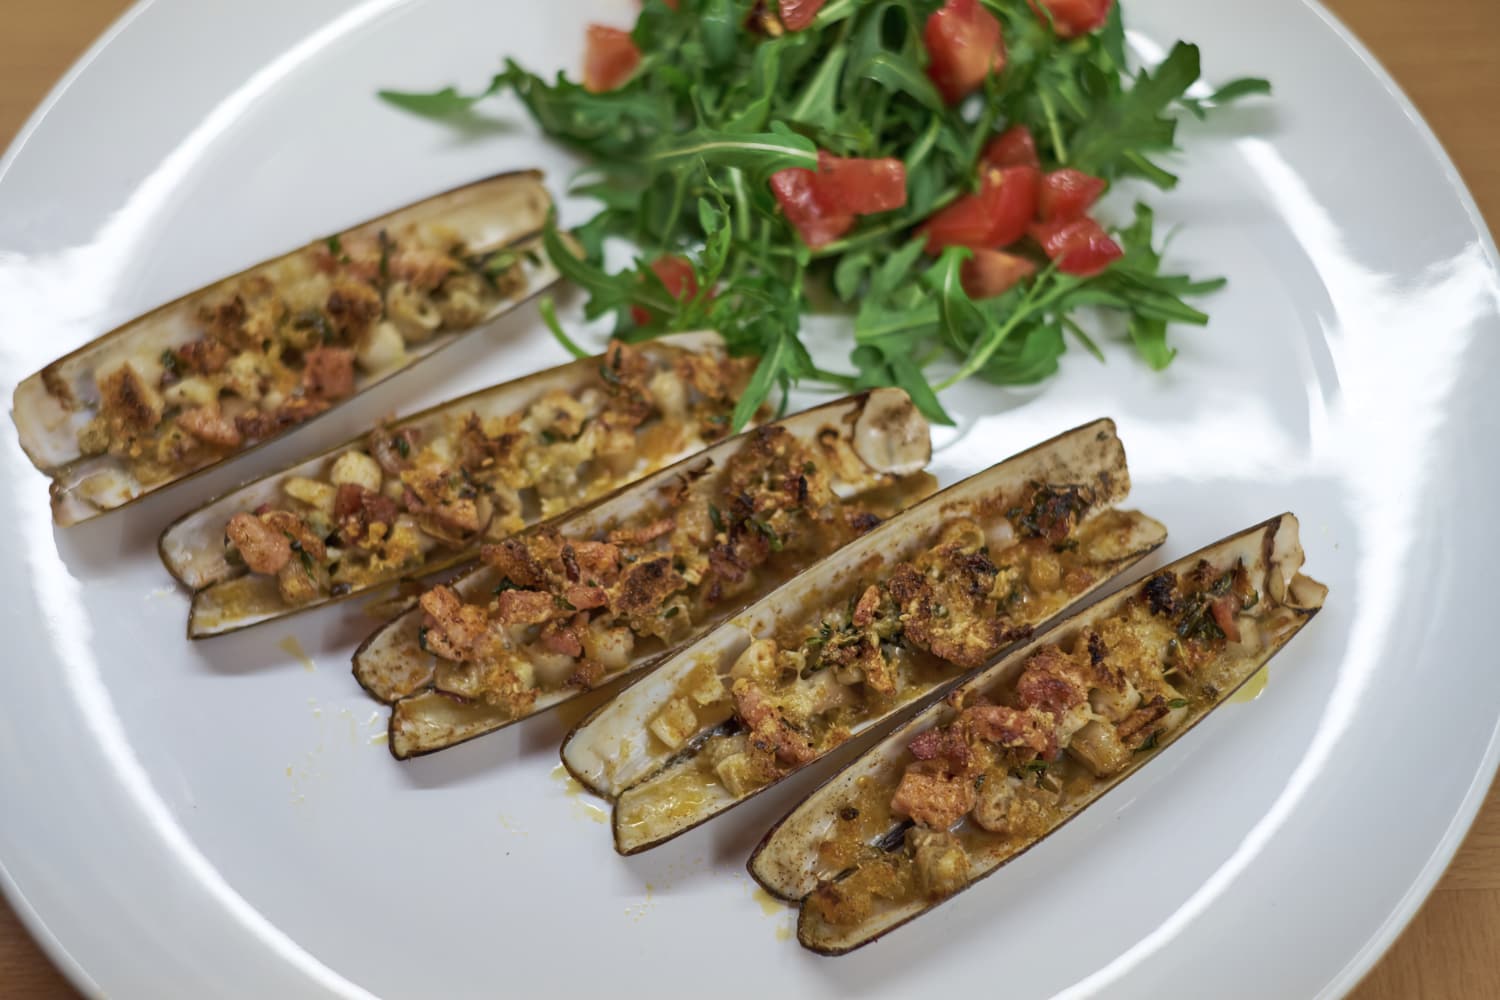 Razor Clams with a Herb and Garlic Crust